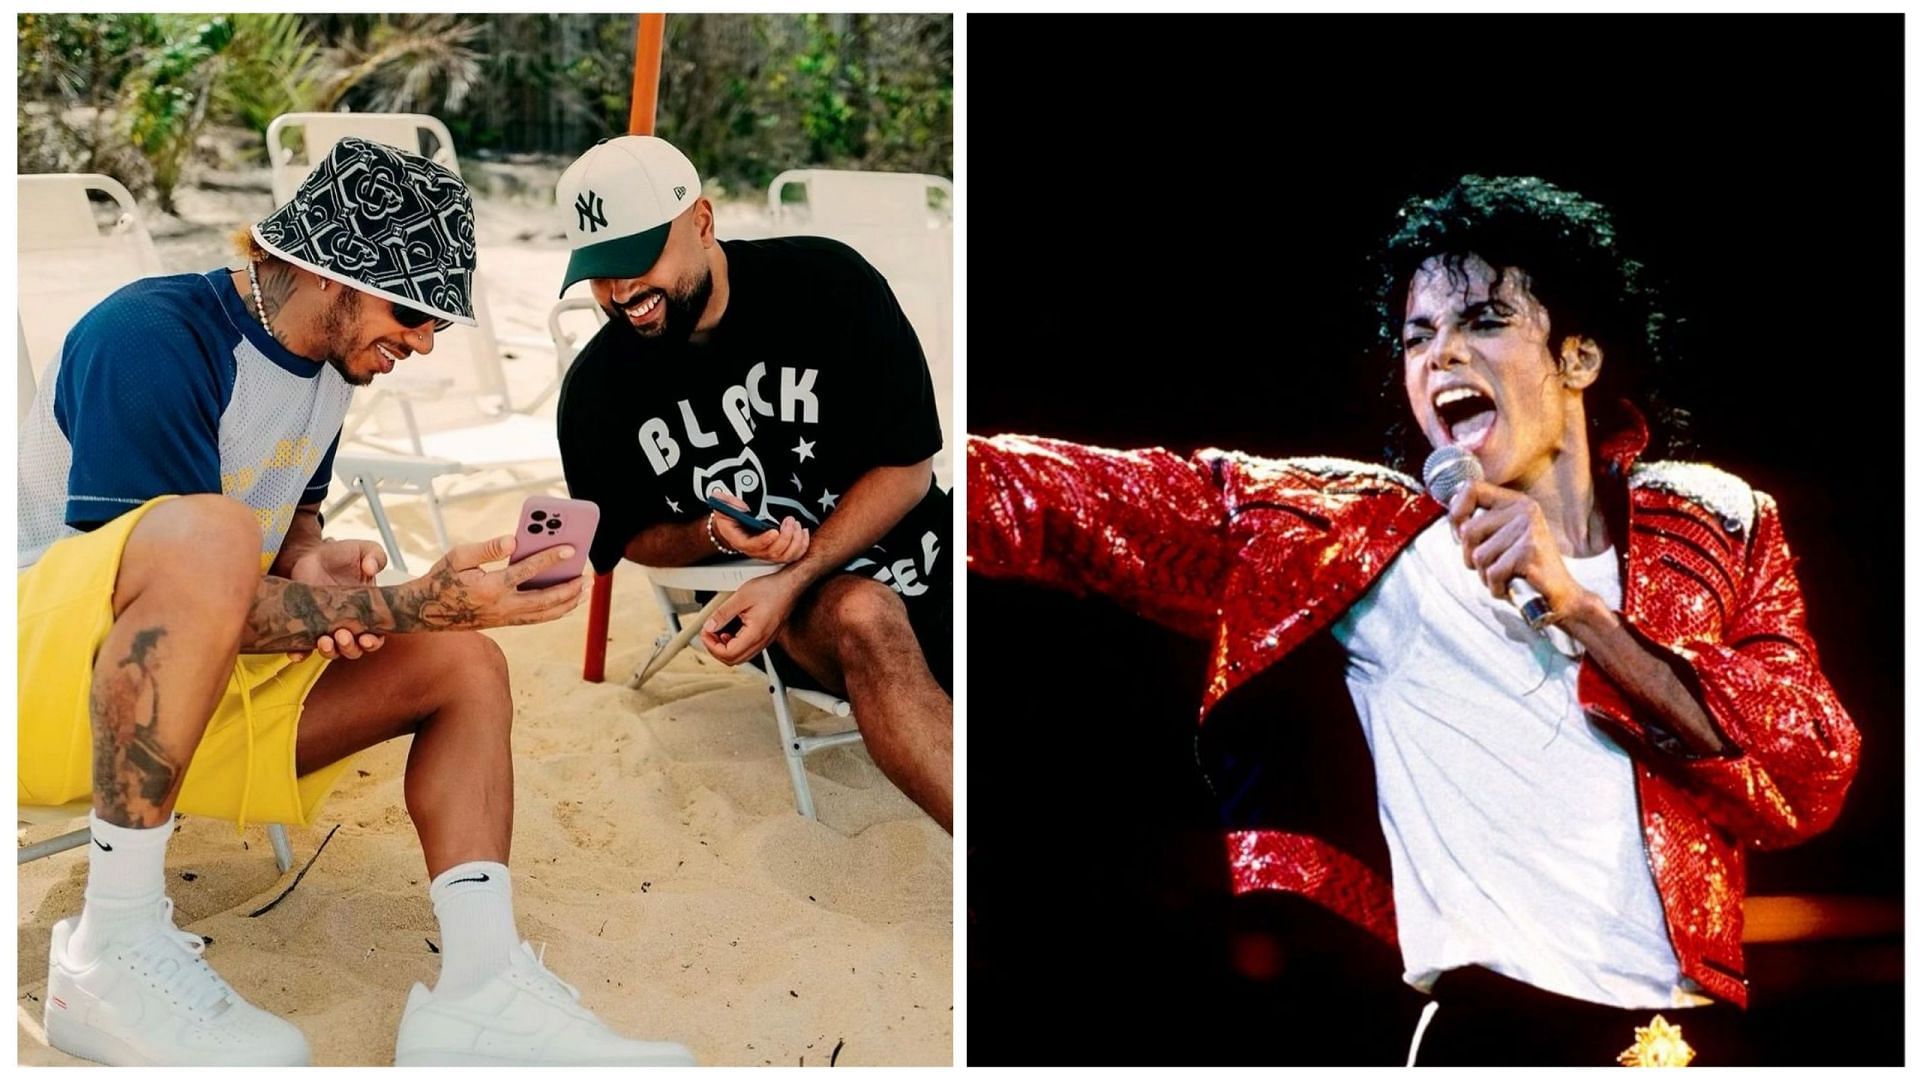 Lewis Hamilton gets a new tattoo featuring 13-time Grammy Awardee Michael Jackson